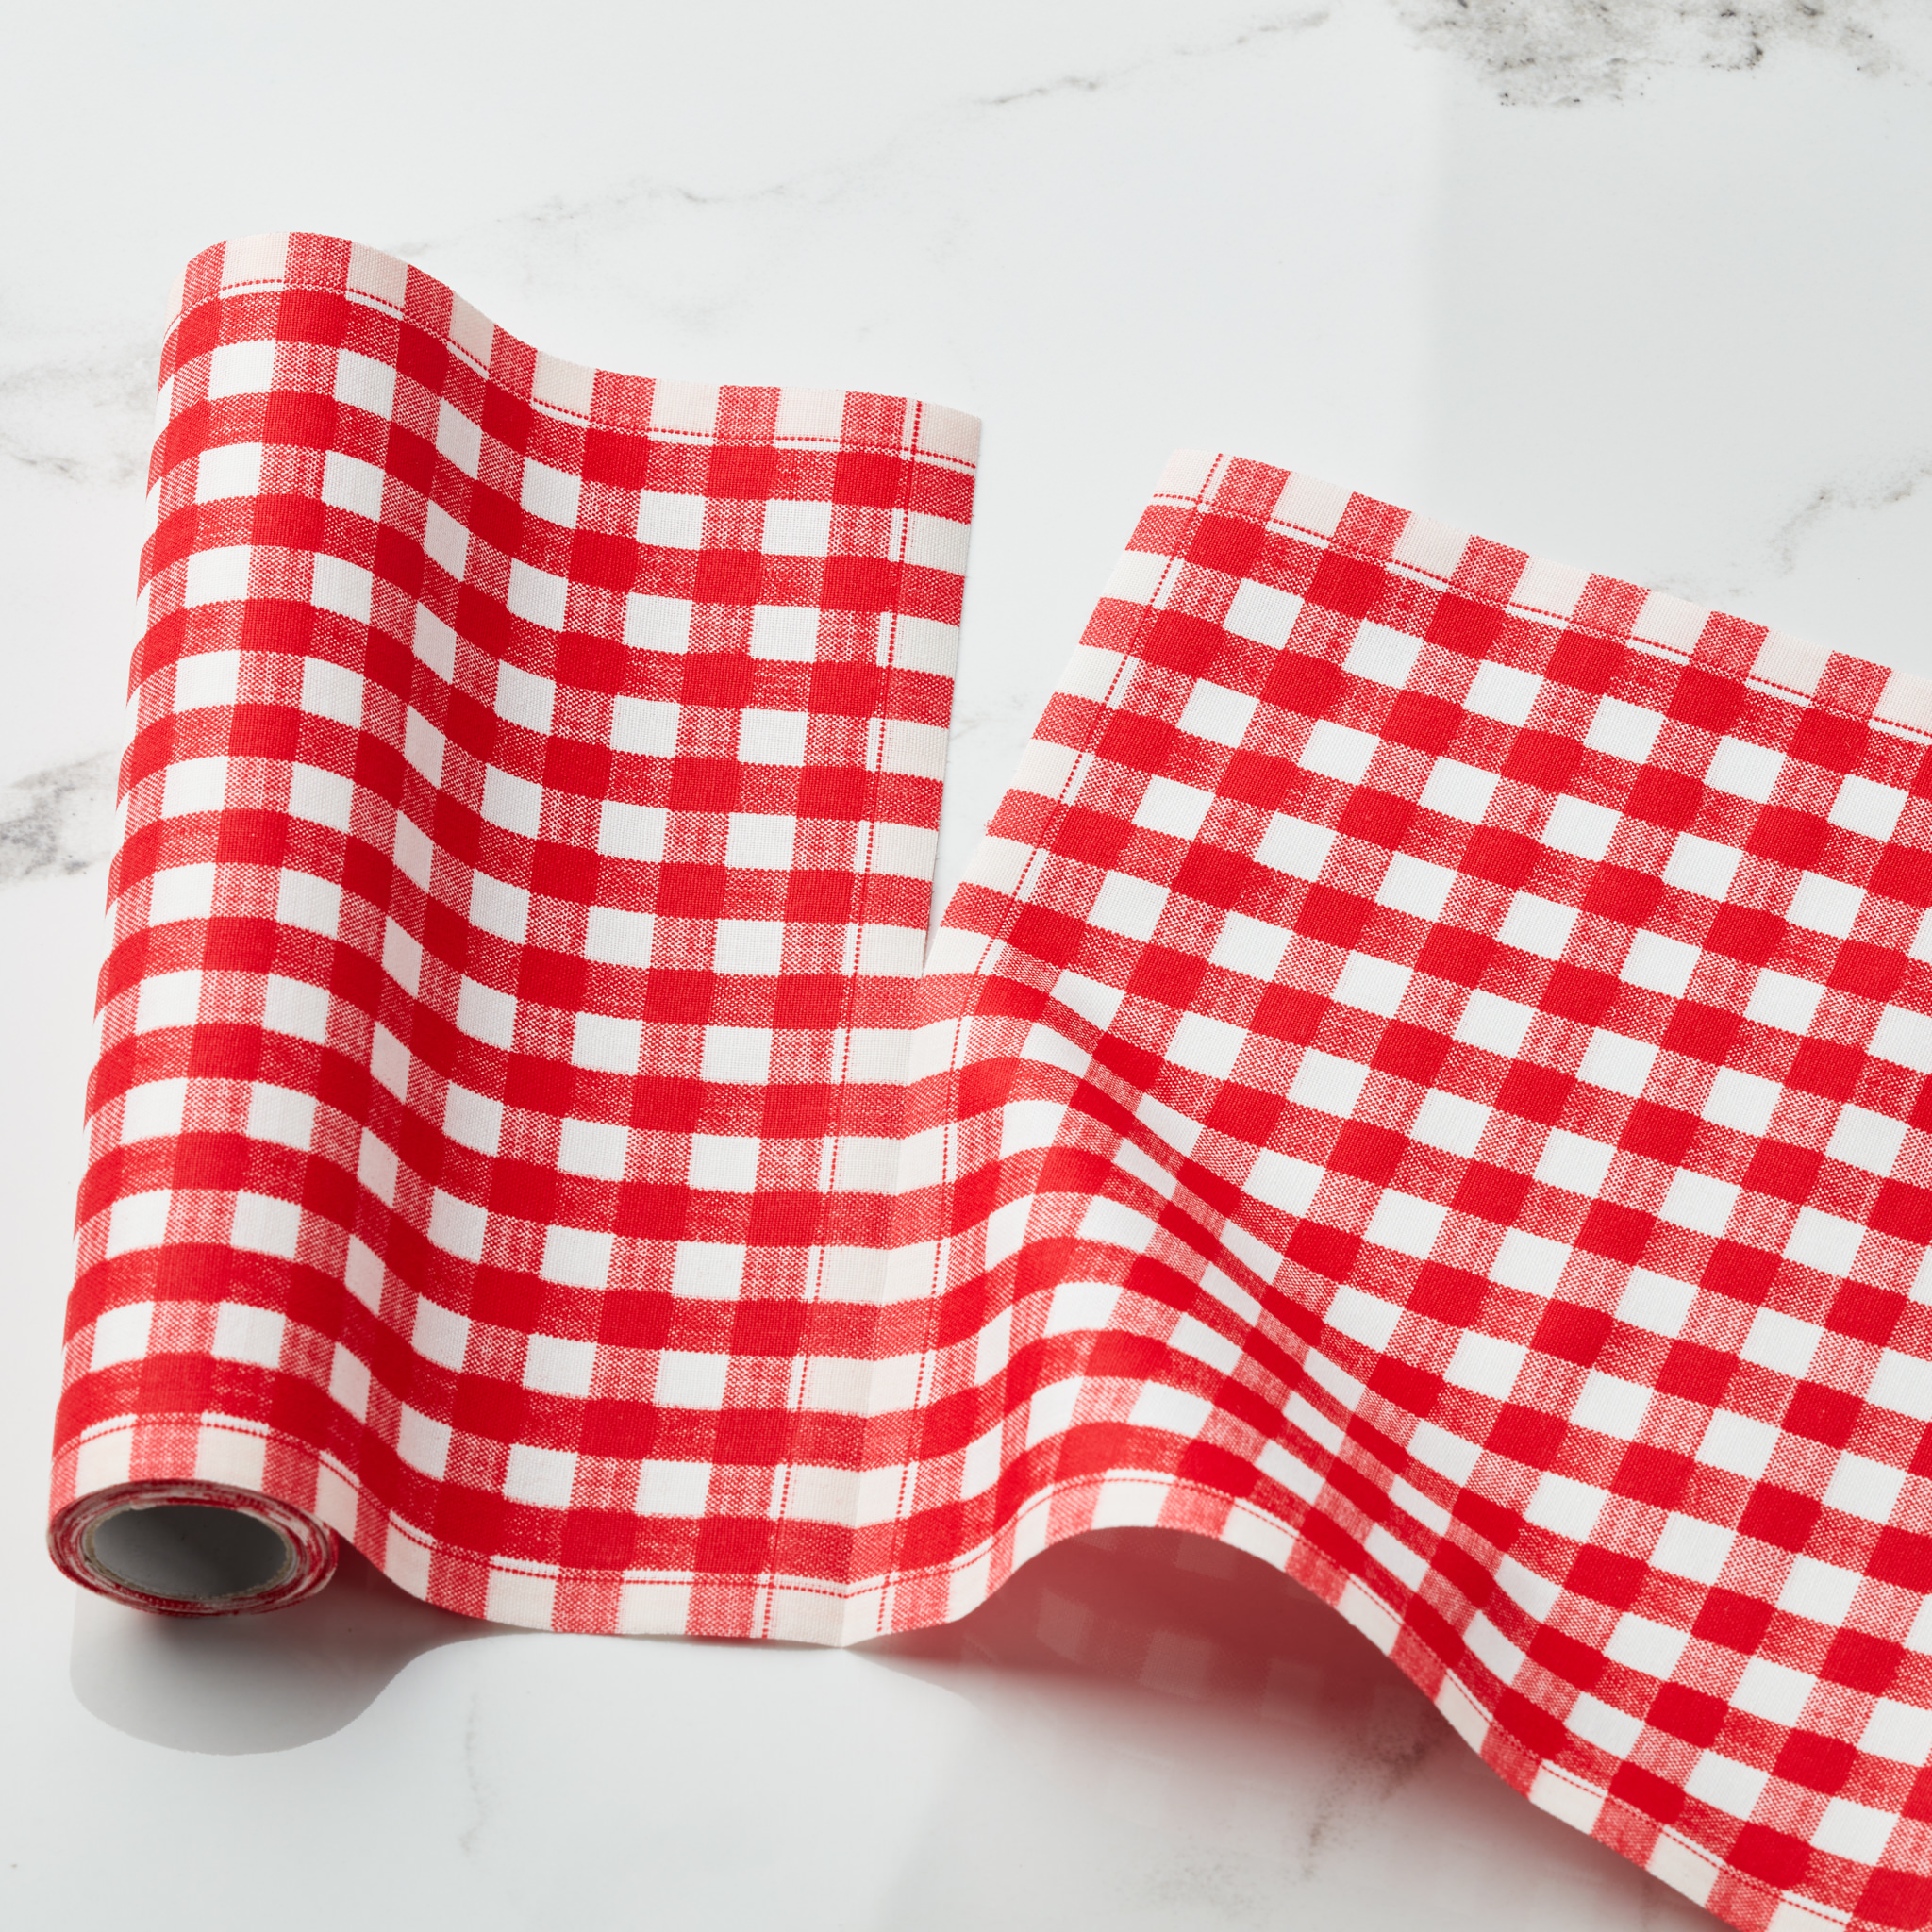 Picnic Gingham Red Cotton Luncheon Napkins 12 Units